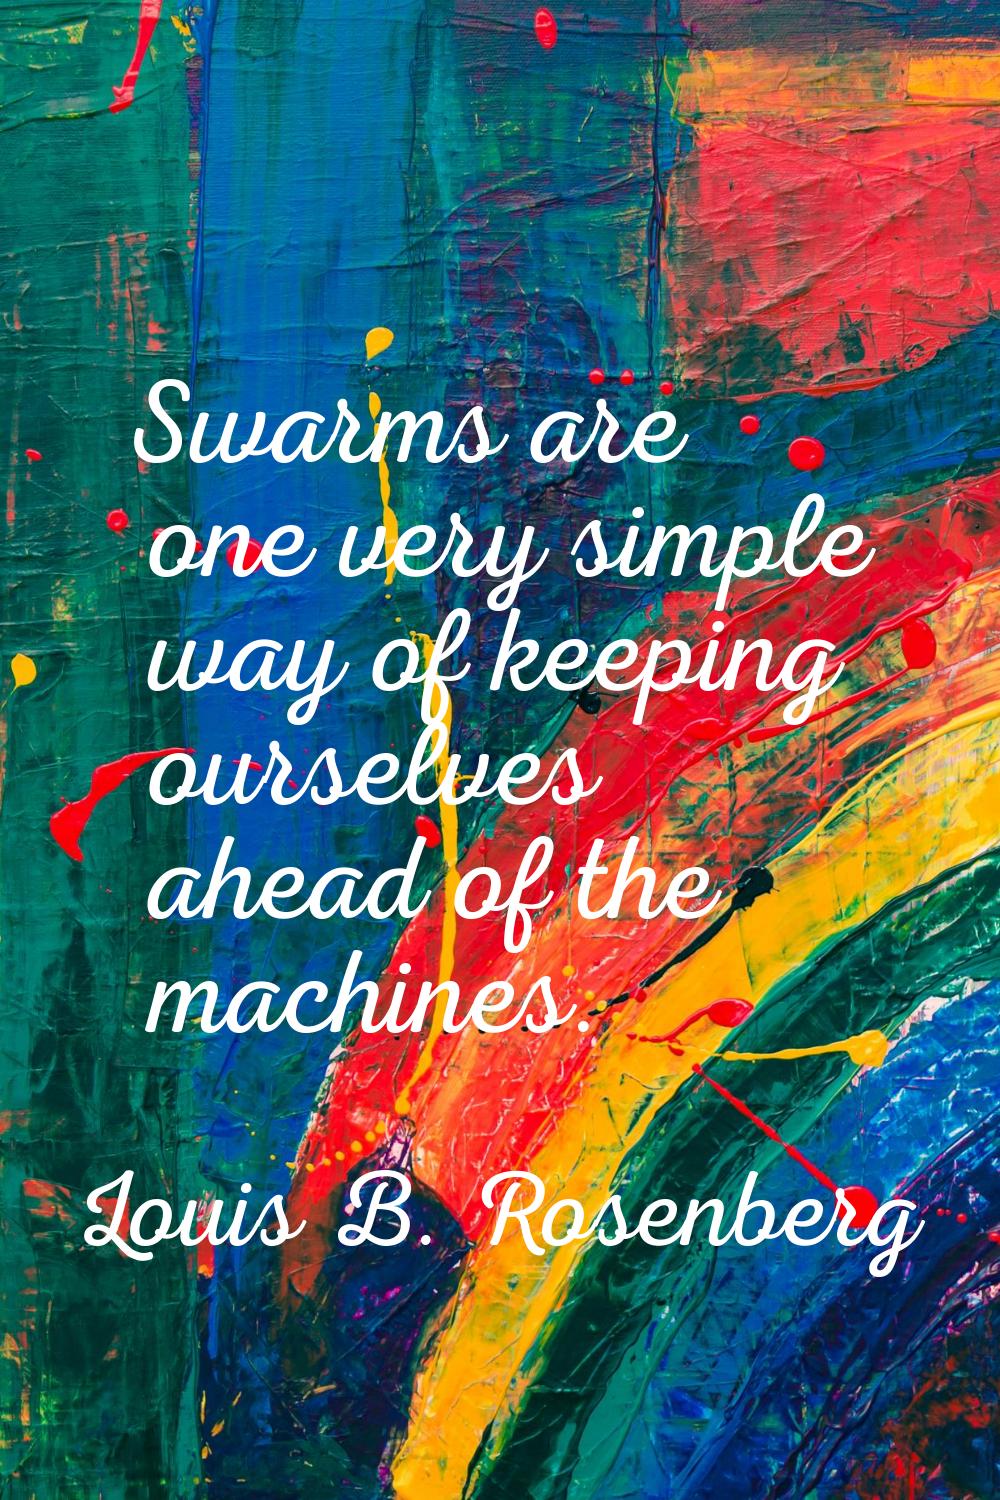 Swarms are one very simple way of keeping ourselves ahead of the machines.